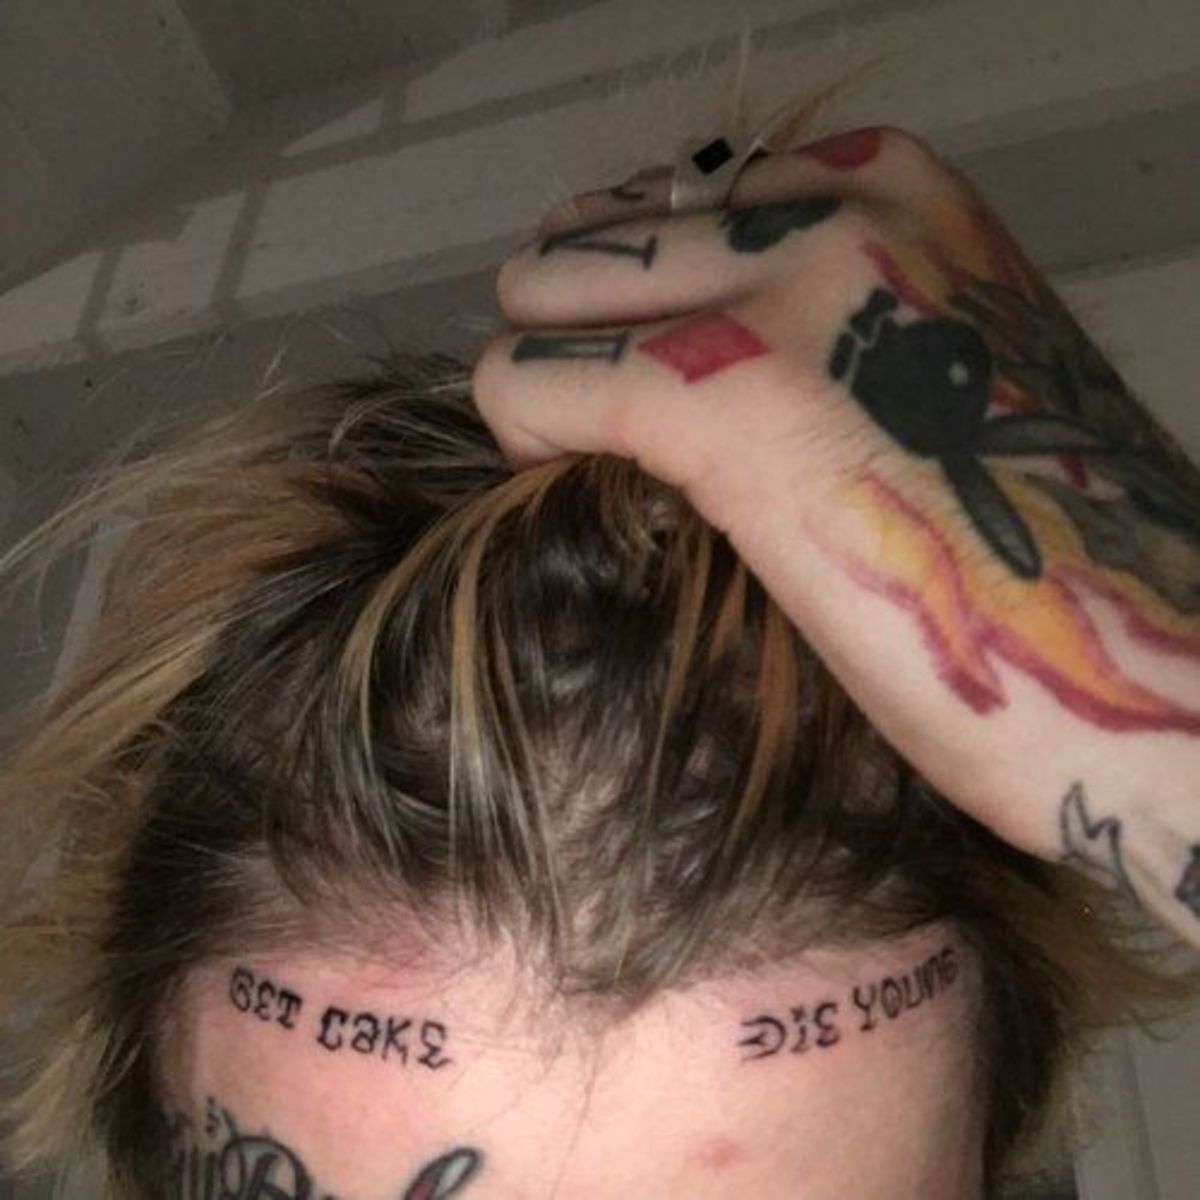 Get-cake-die-young-Lil-peep-tattoo